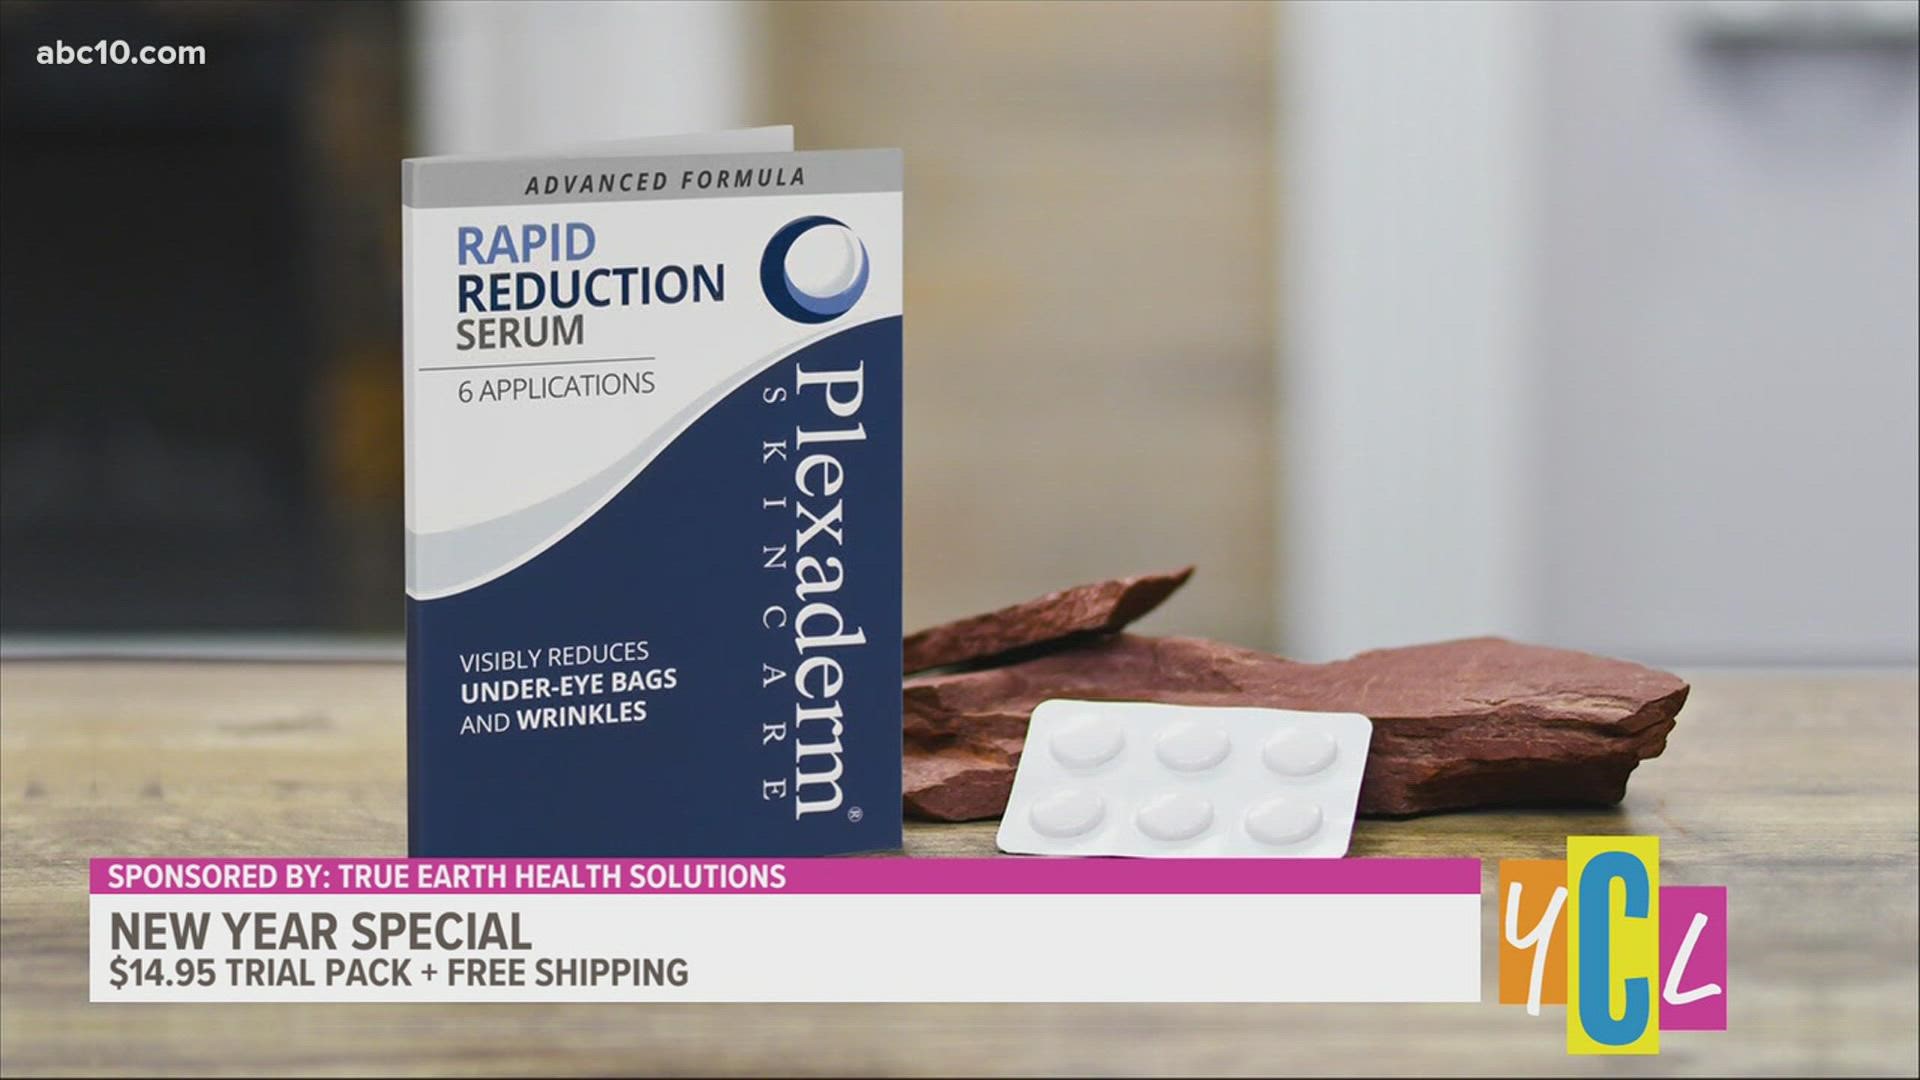 Let Plexaderm help. We took a look at their skincare products that'll have you looking fabulous in no time. This segment paid for by True Earth Health Solutions.